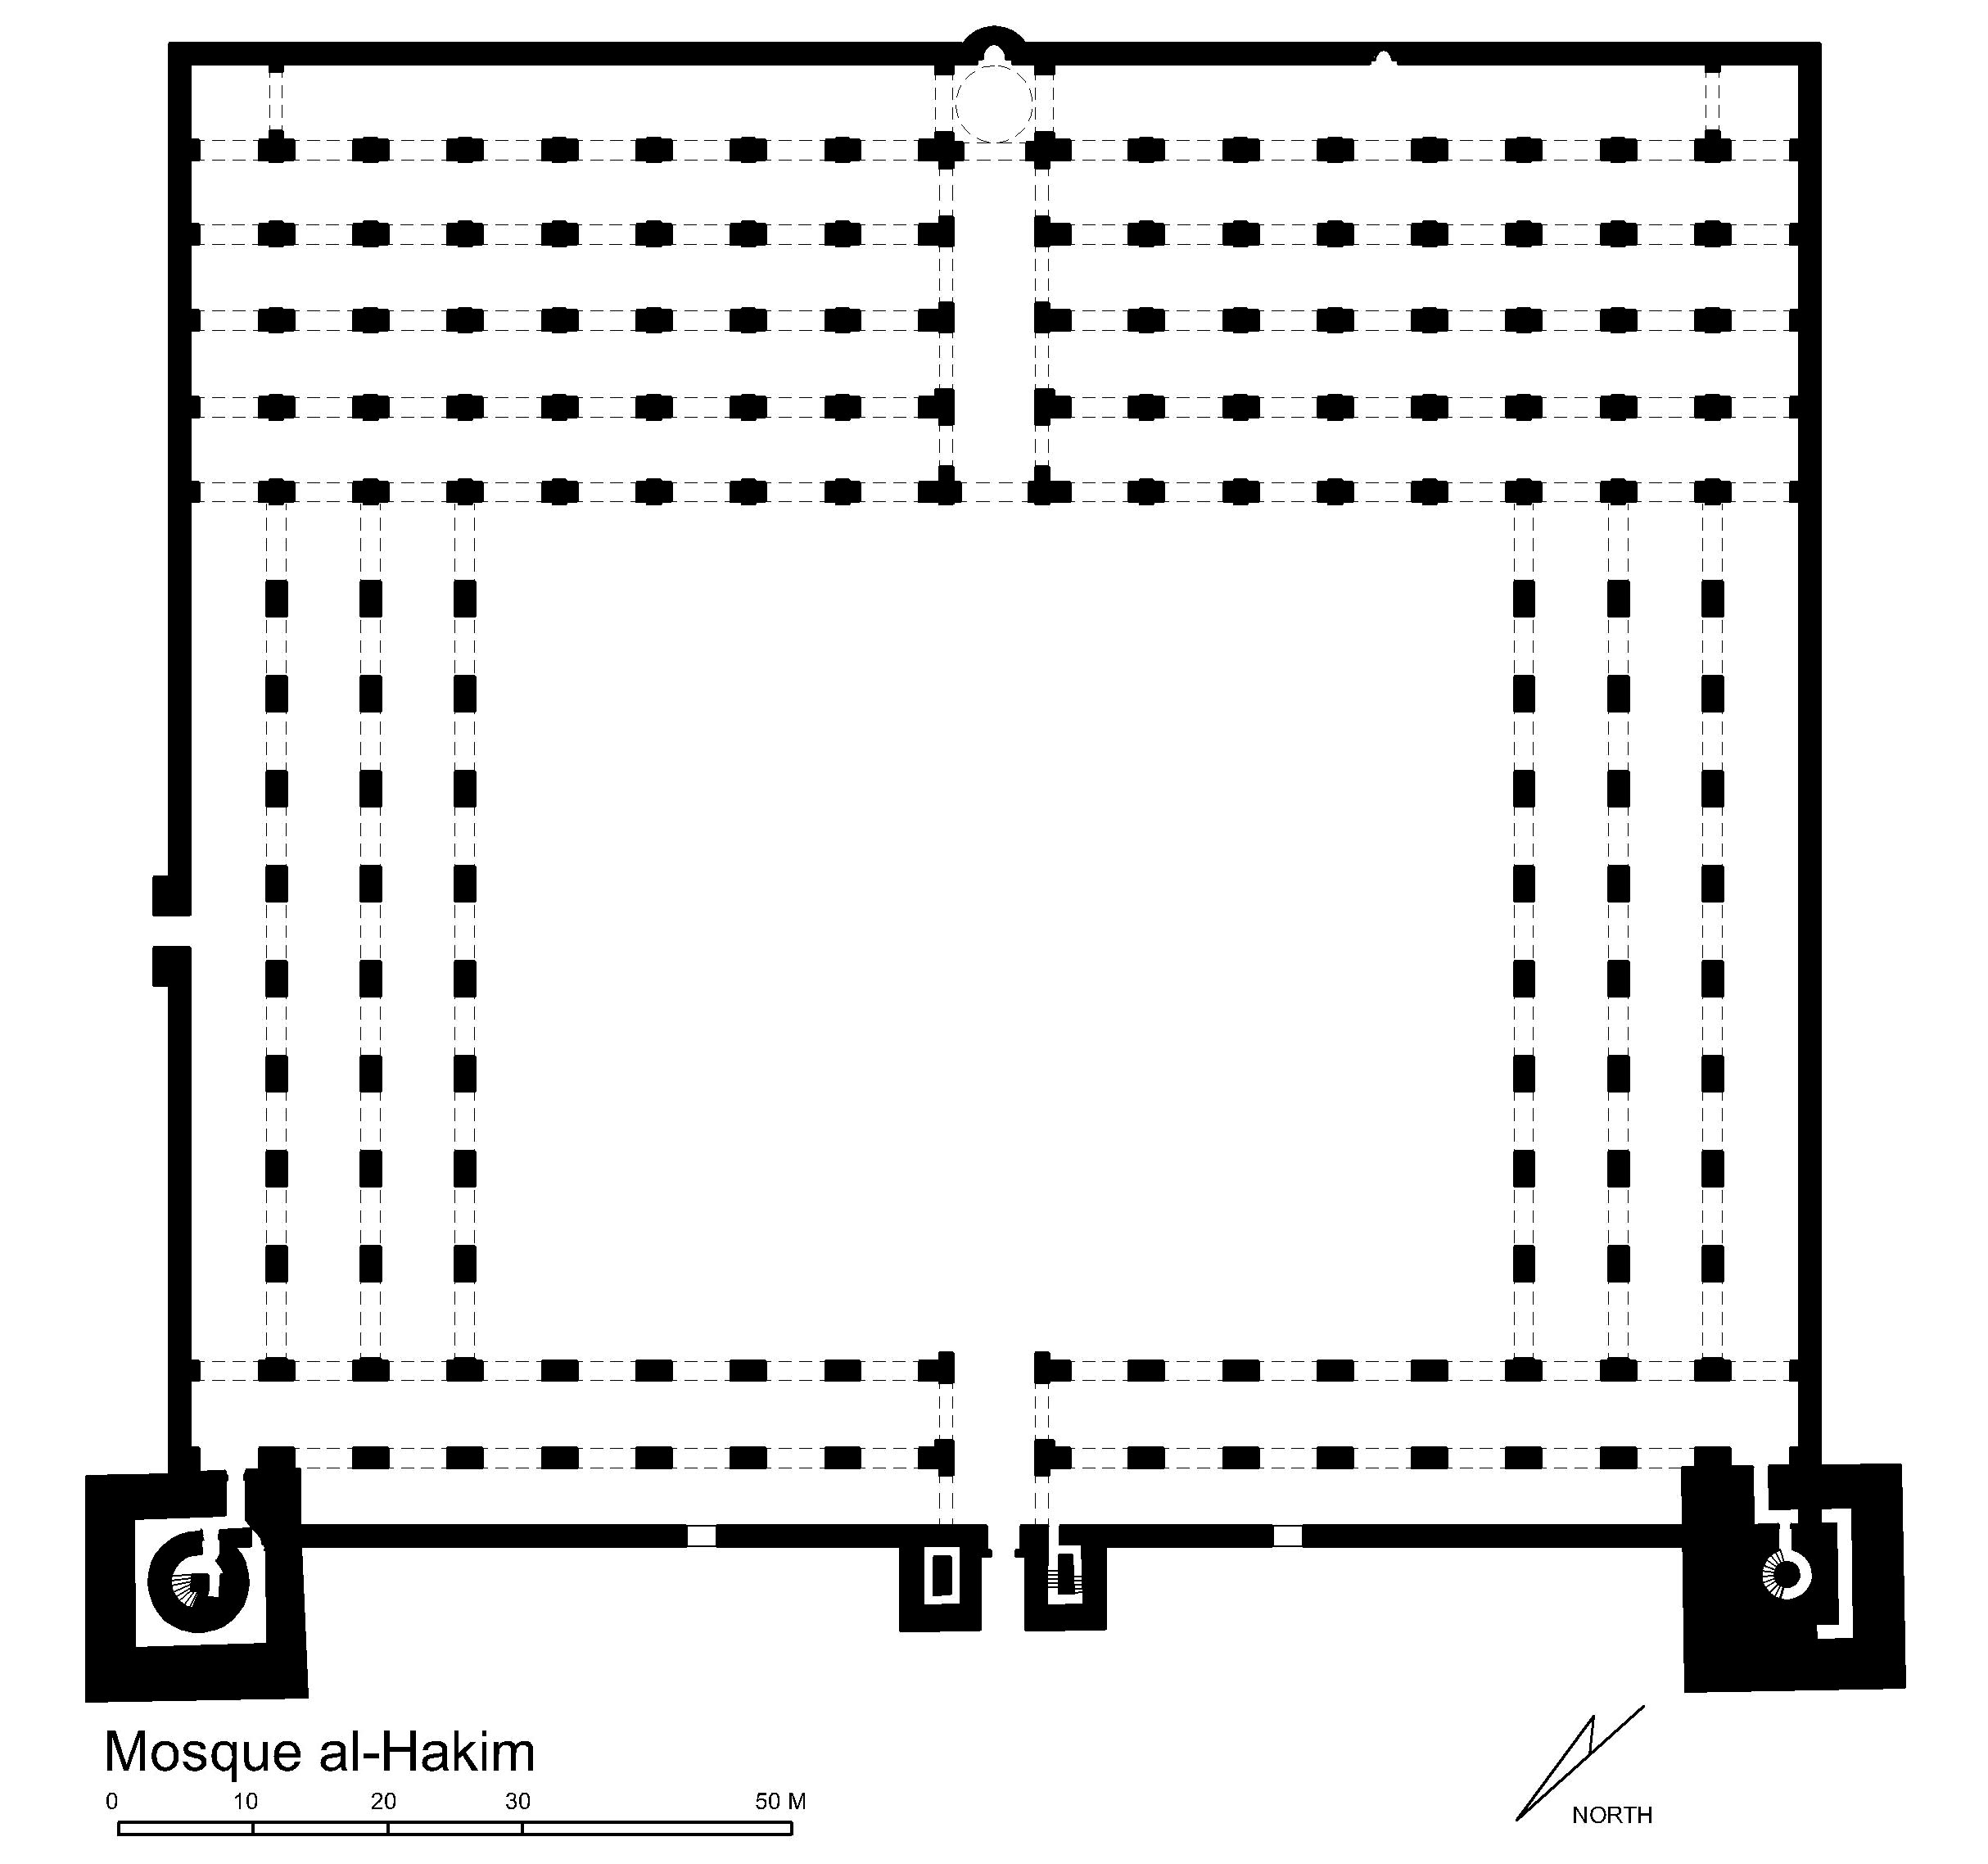 Jami' al-Hakim - Floor plan of mosque in AutoCAD 2000 format. Click the download button to download a zipped file containing the .dwg file. 